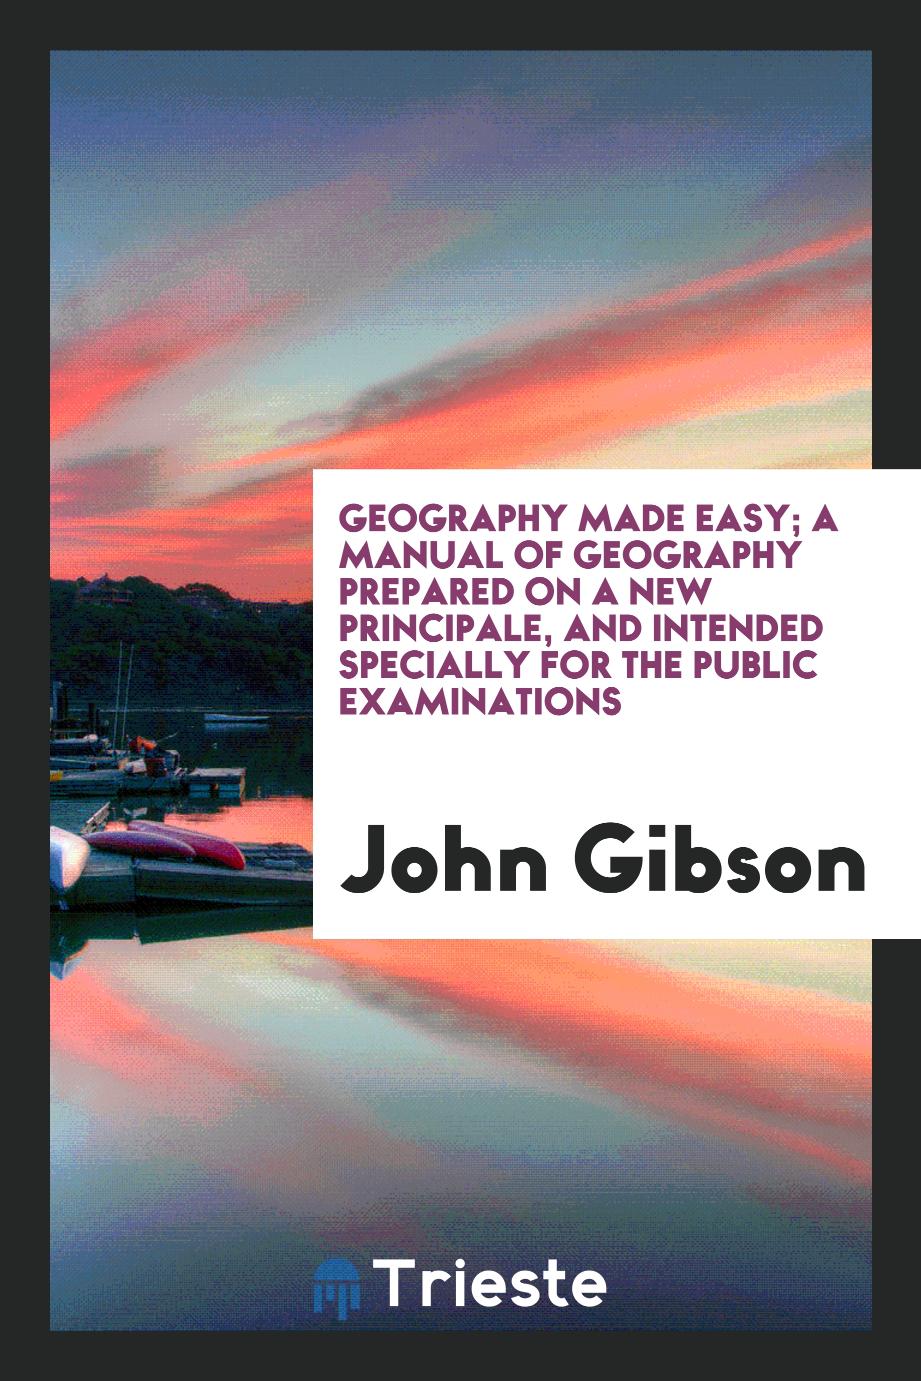 Geography Made Easy; A Manual of Geography Prepared on a New Principale, and Intended Specially for the Public Examinations